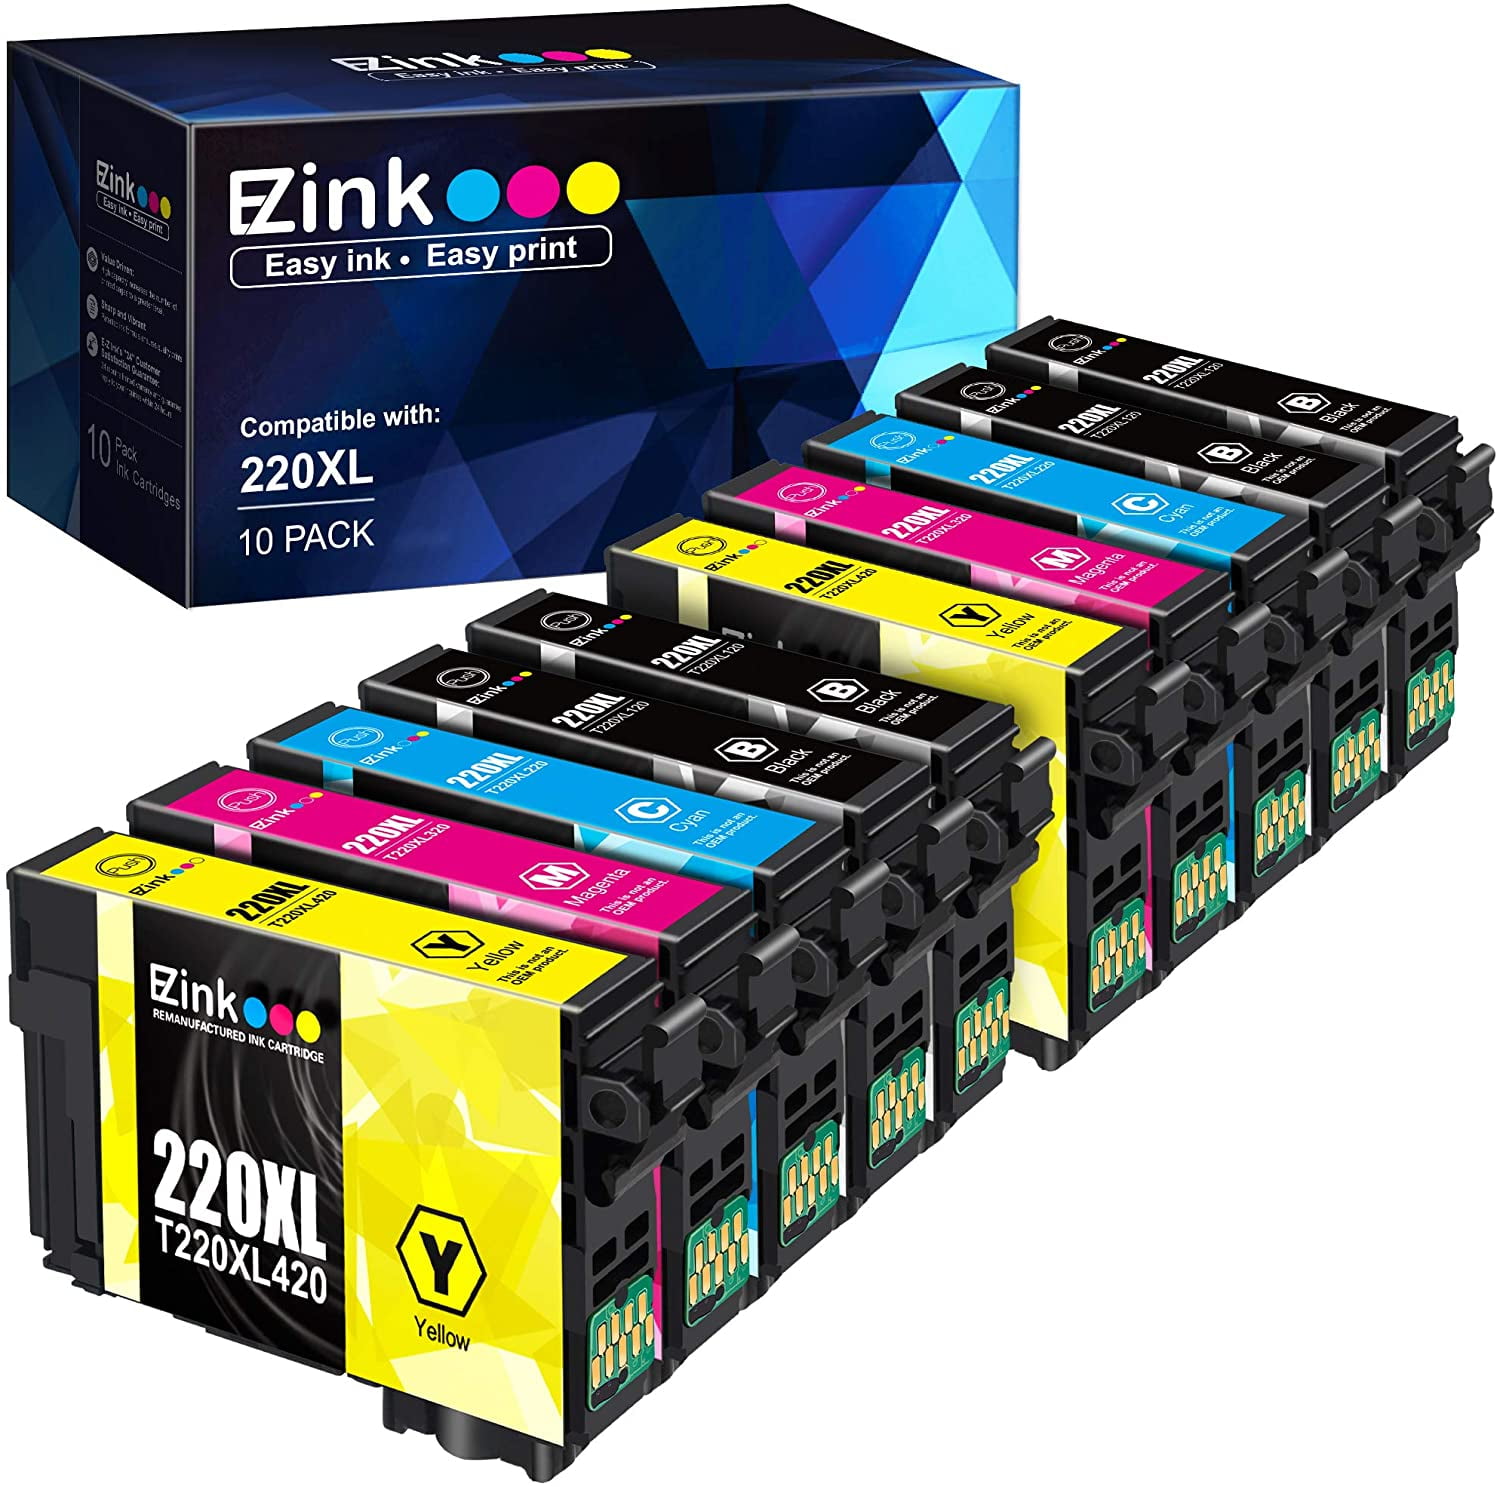 for XP-320 XP 420 XP-424 WF-2630 WF-2650 WF2660 WF-2750 WF-2760 T220XL220 Cyan T220XL320 Magenta T220XL420 Yellow 3-Pack LD Products Remanufactured Replacement for Epson 220XL Ink Cartridges 220 XL 